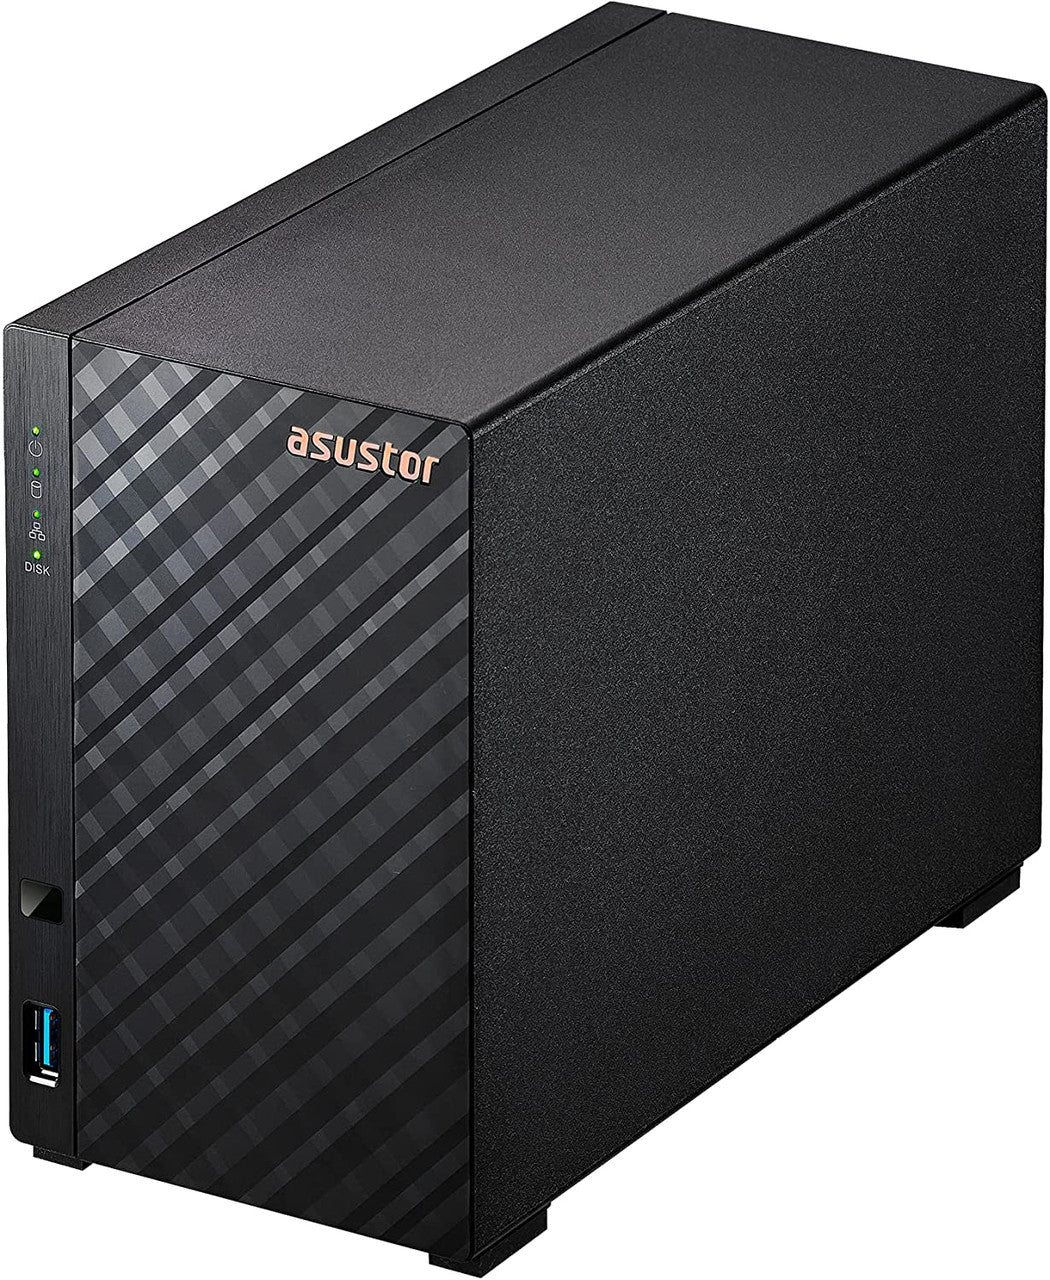 Asustor AS1102T 2-Bay Drivestor 2 NAS with 1GB RAM and 24TB (2x12TB) Western Digital RED Plus Drives